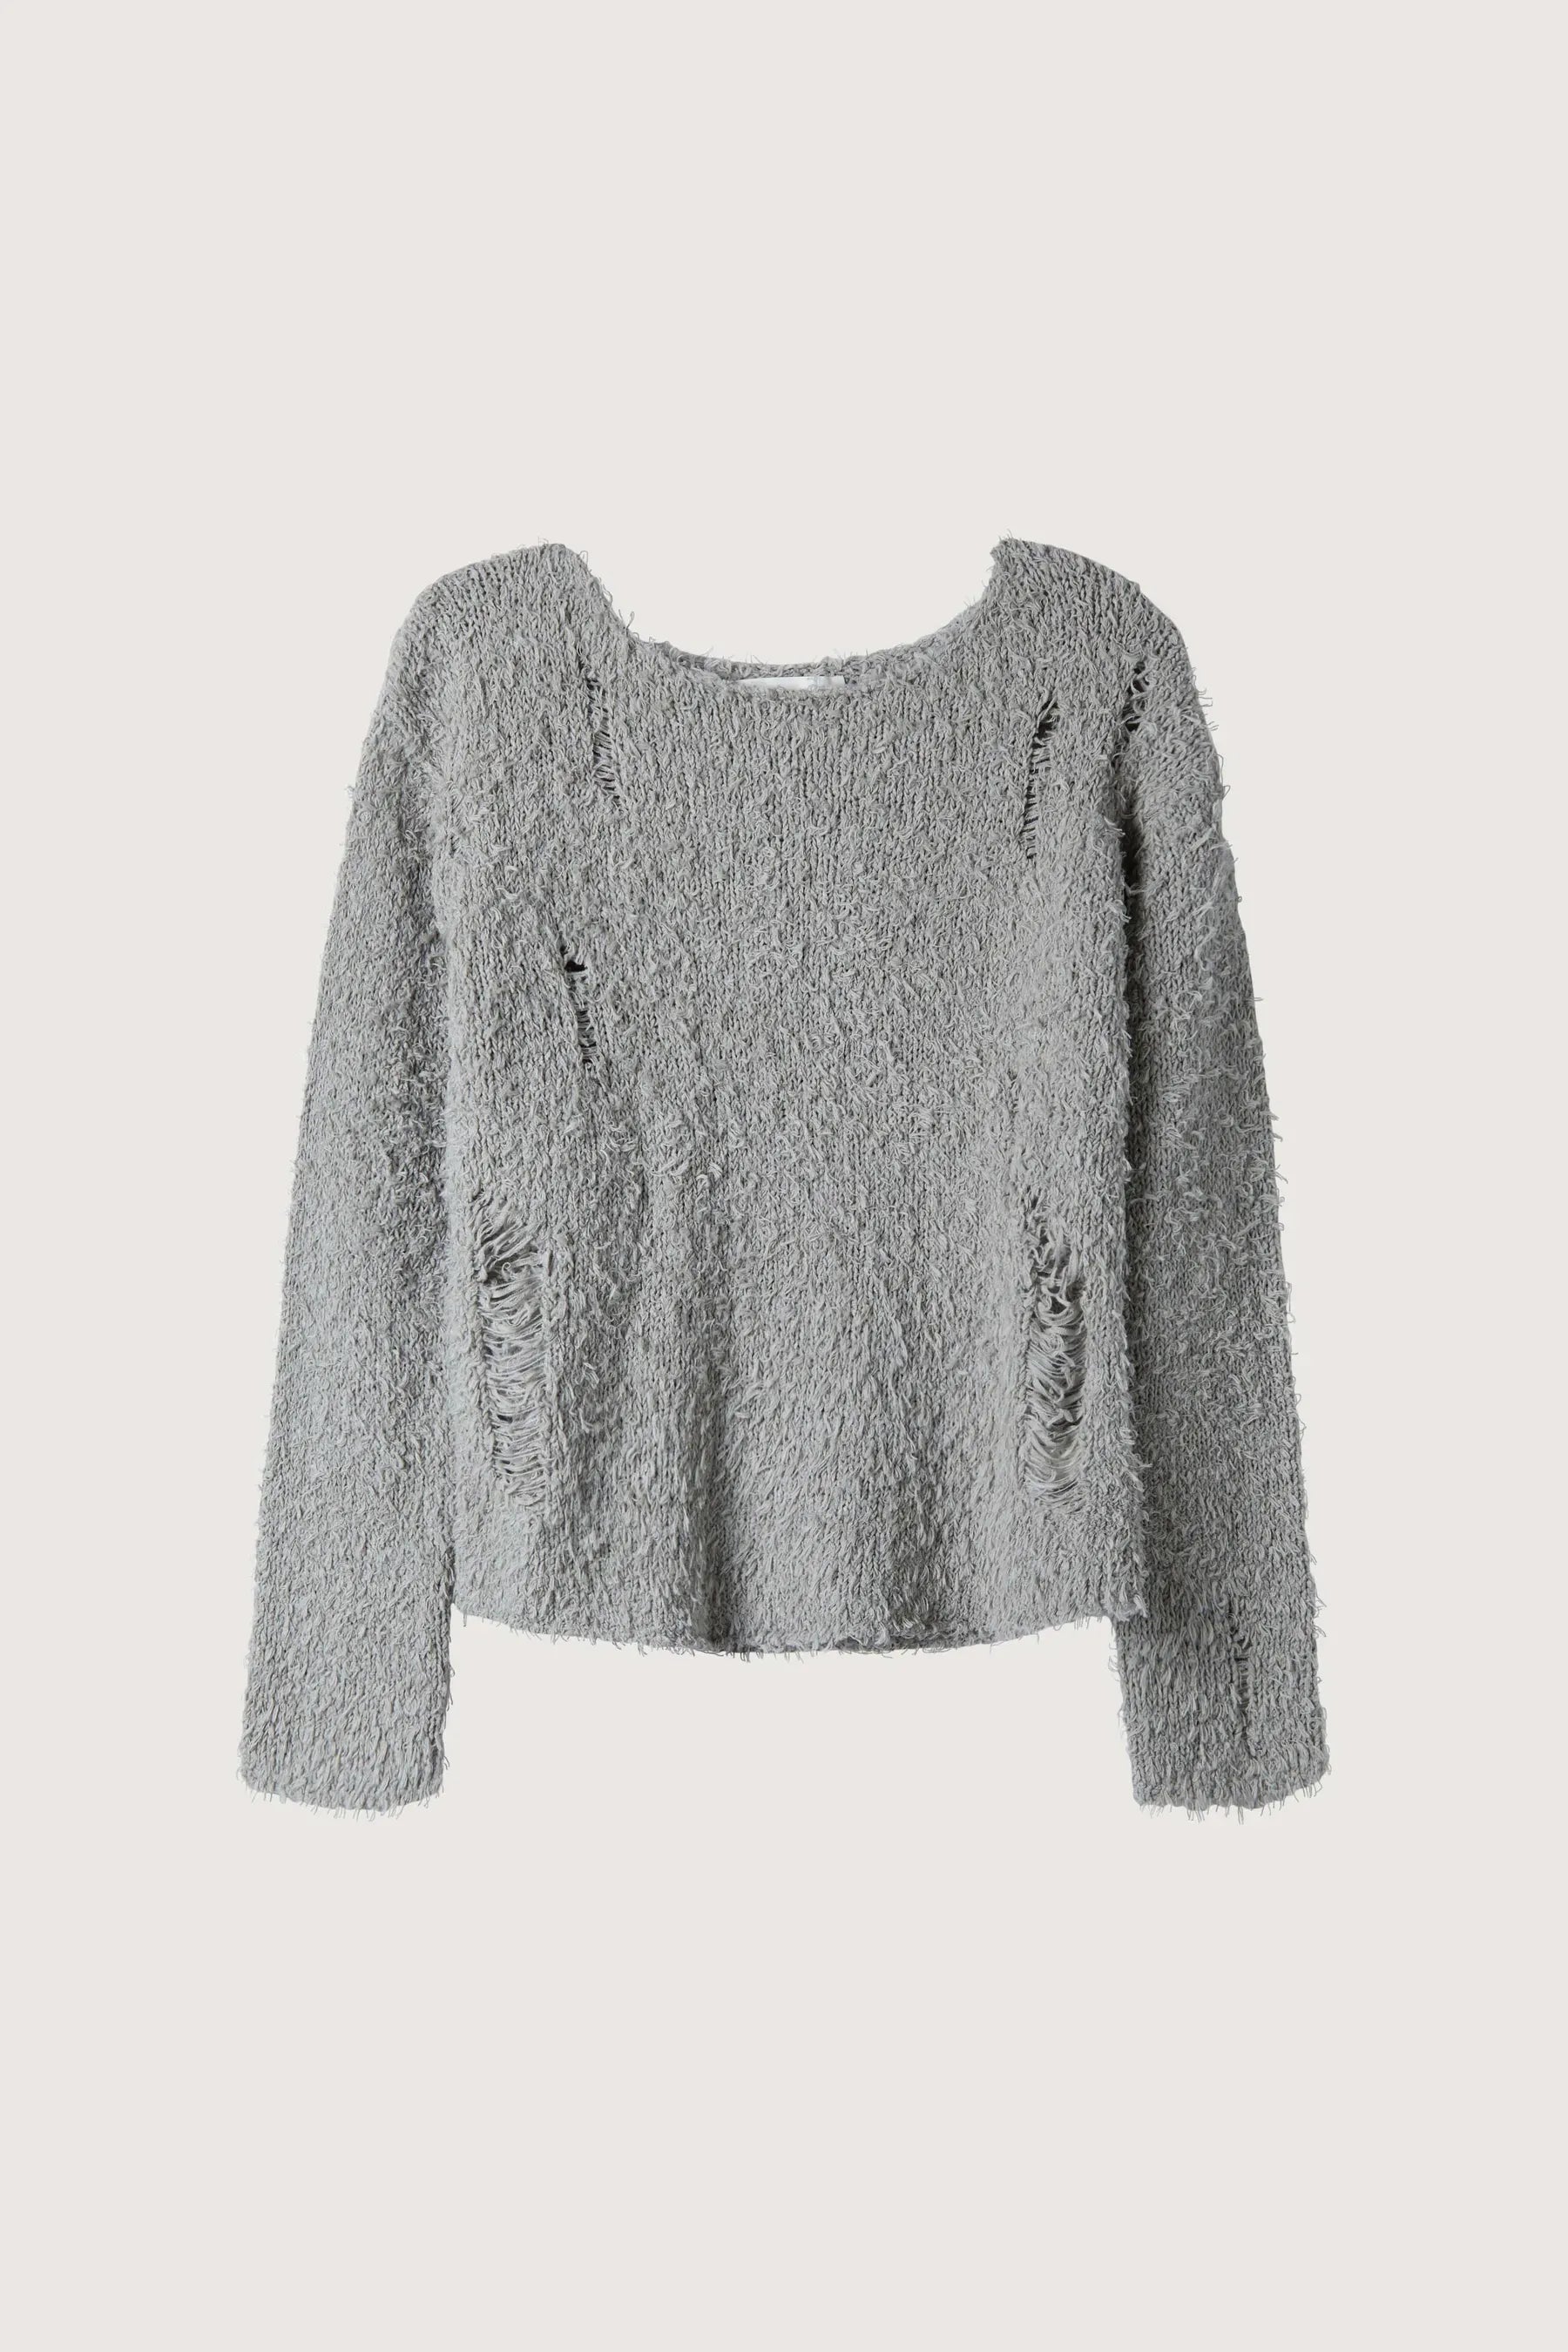 Textured Distressed Sweater